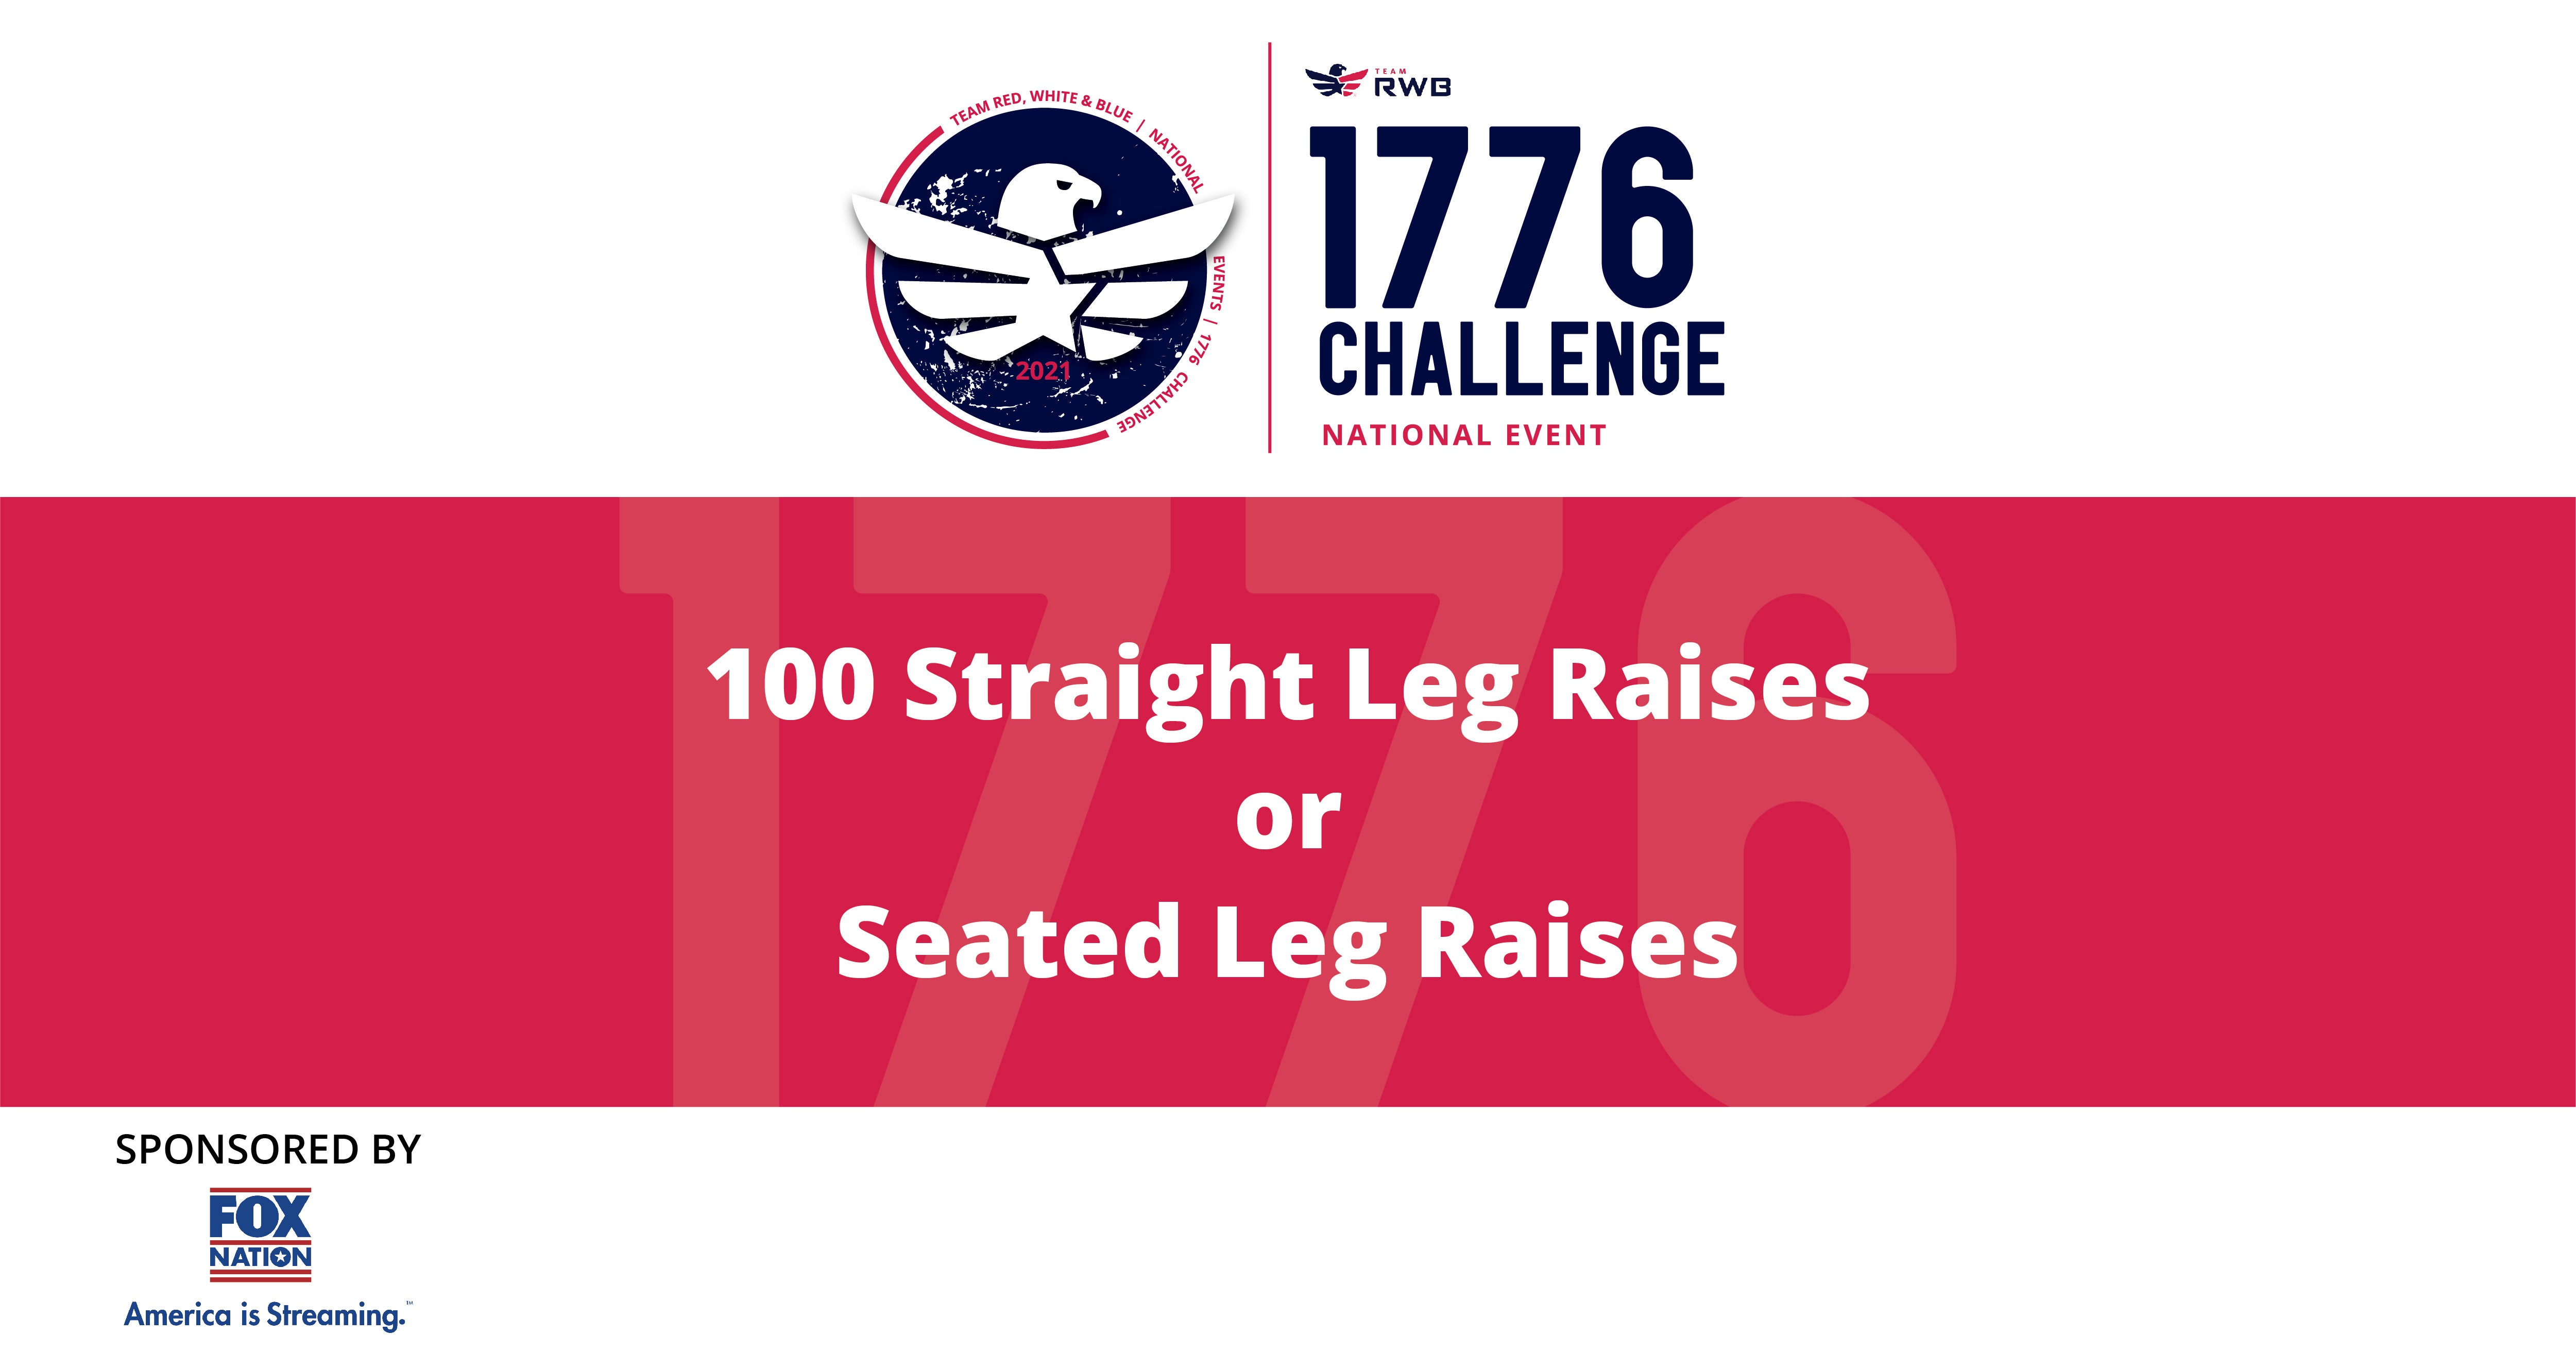 Fox Nation supports America's veterans with 1776 challenge